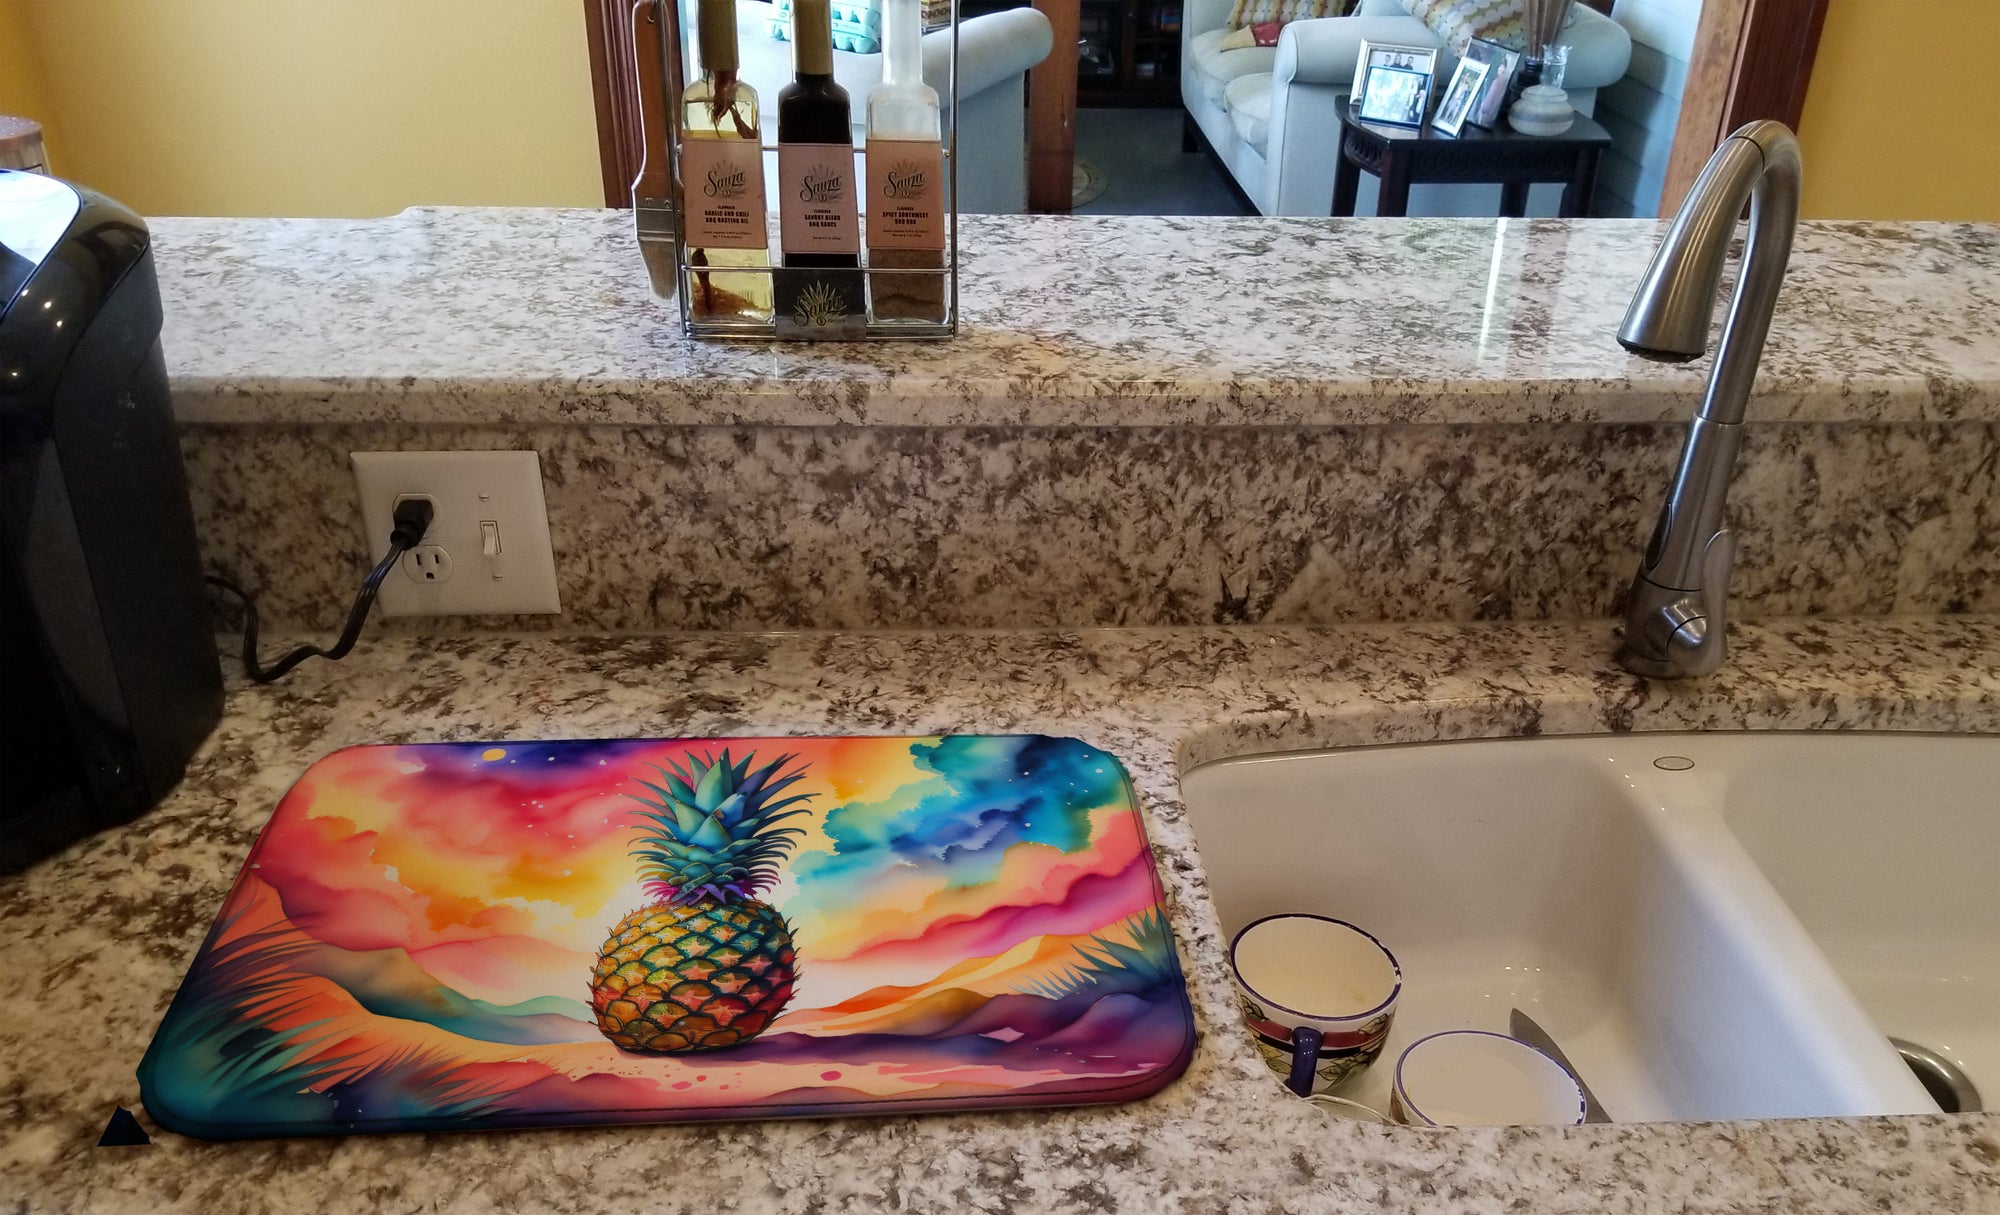 Buy this Colorful Pineapple Dish Drying Mat